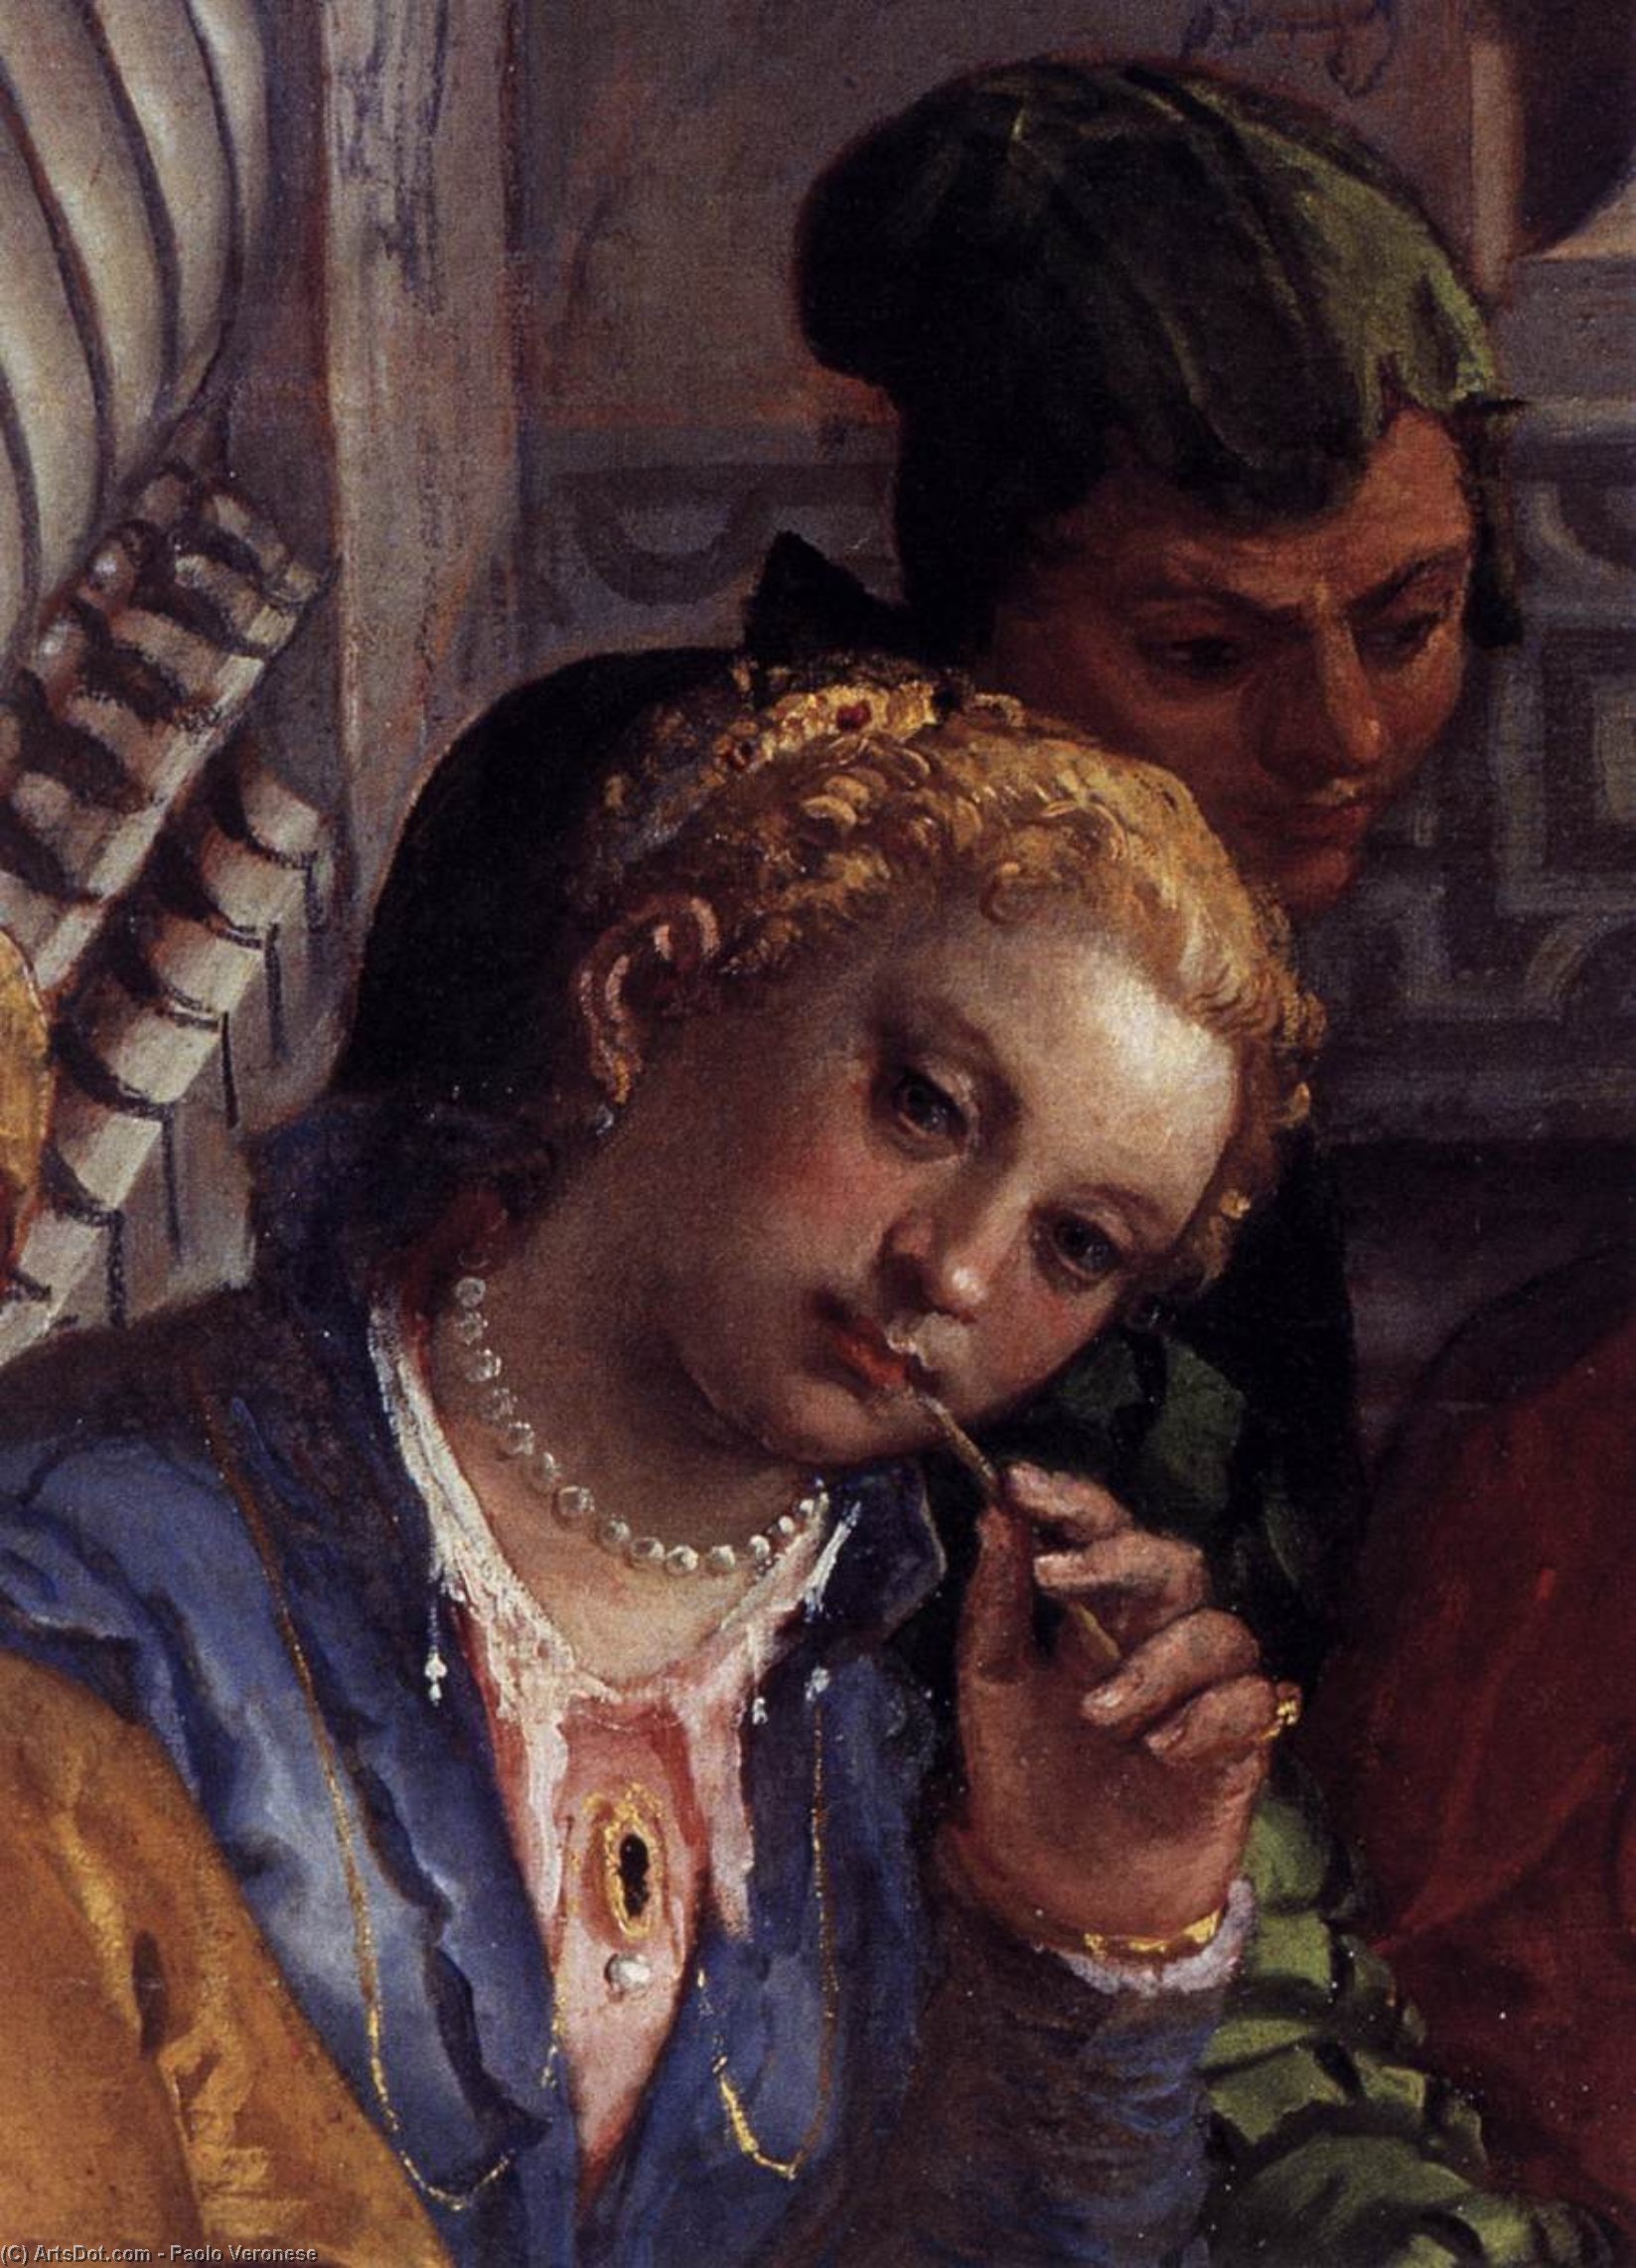 WikiOO.org - 백과 사전 - 회화, 삽화 Paolo Veronese - The Wedding at Cana (detail)3